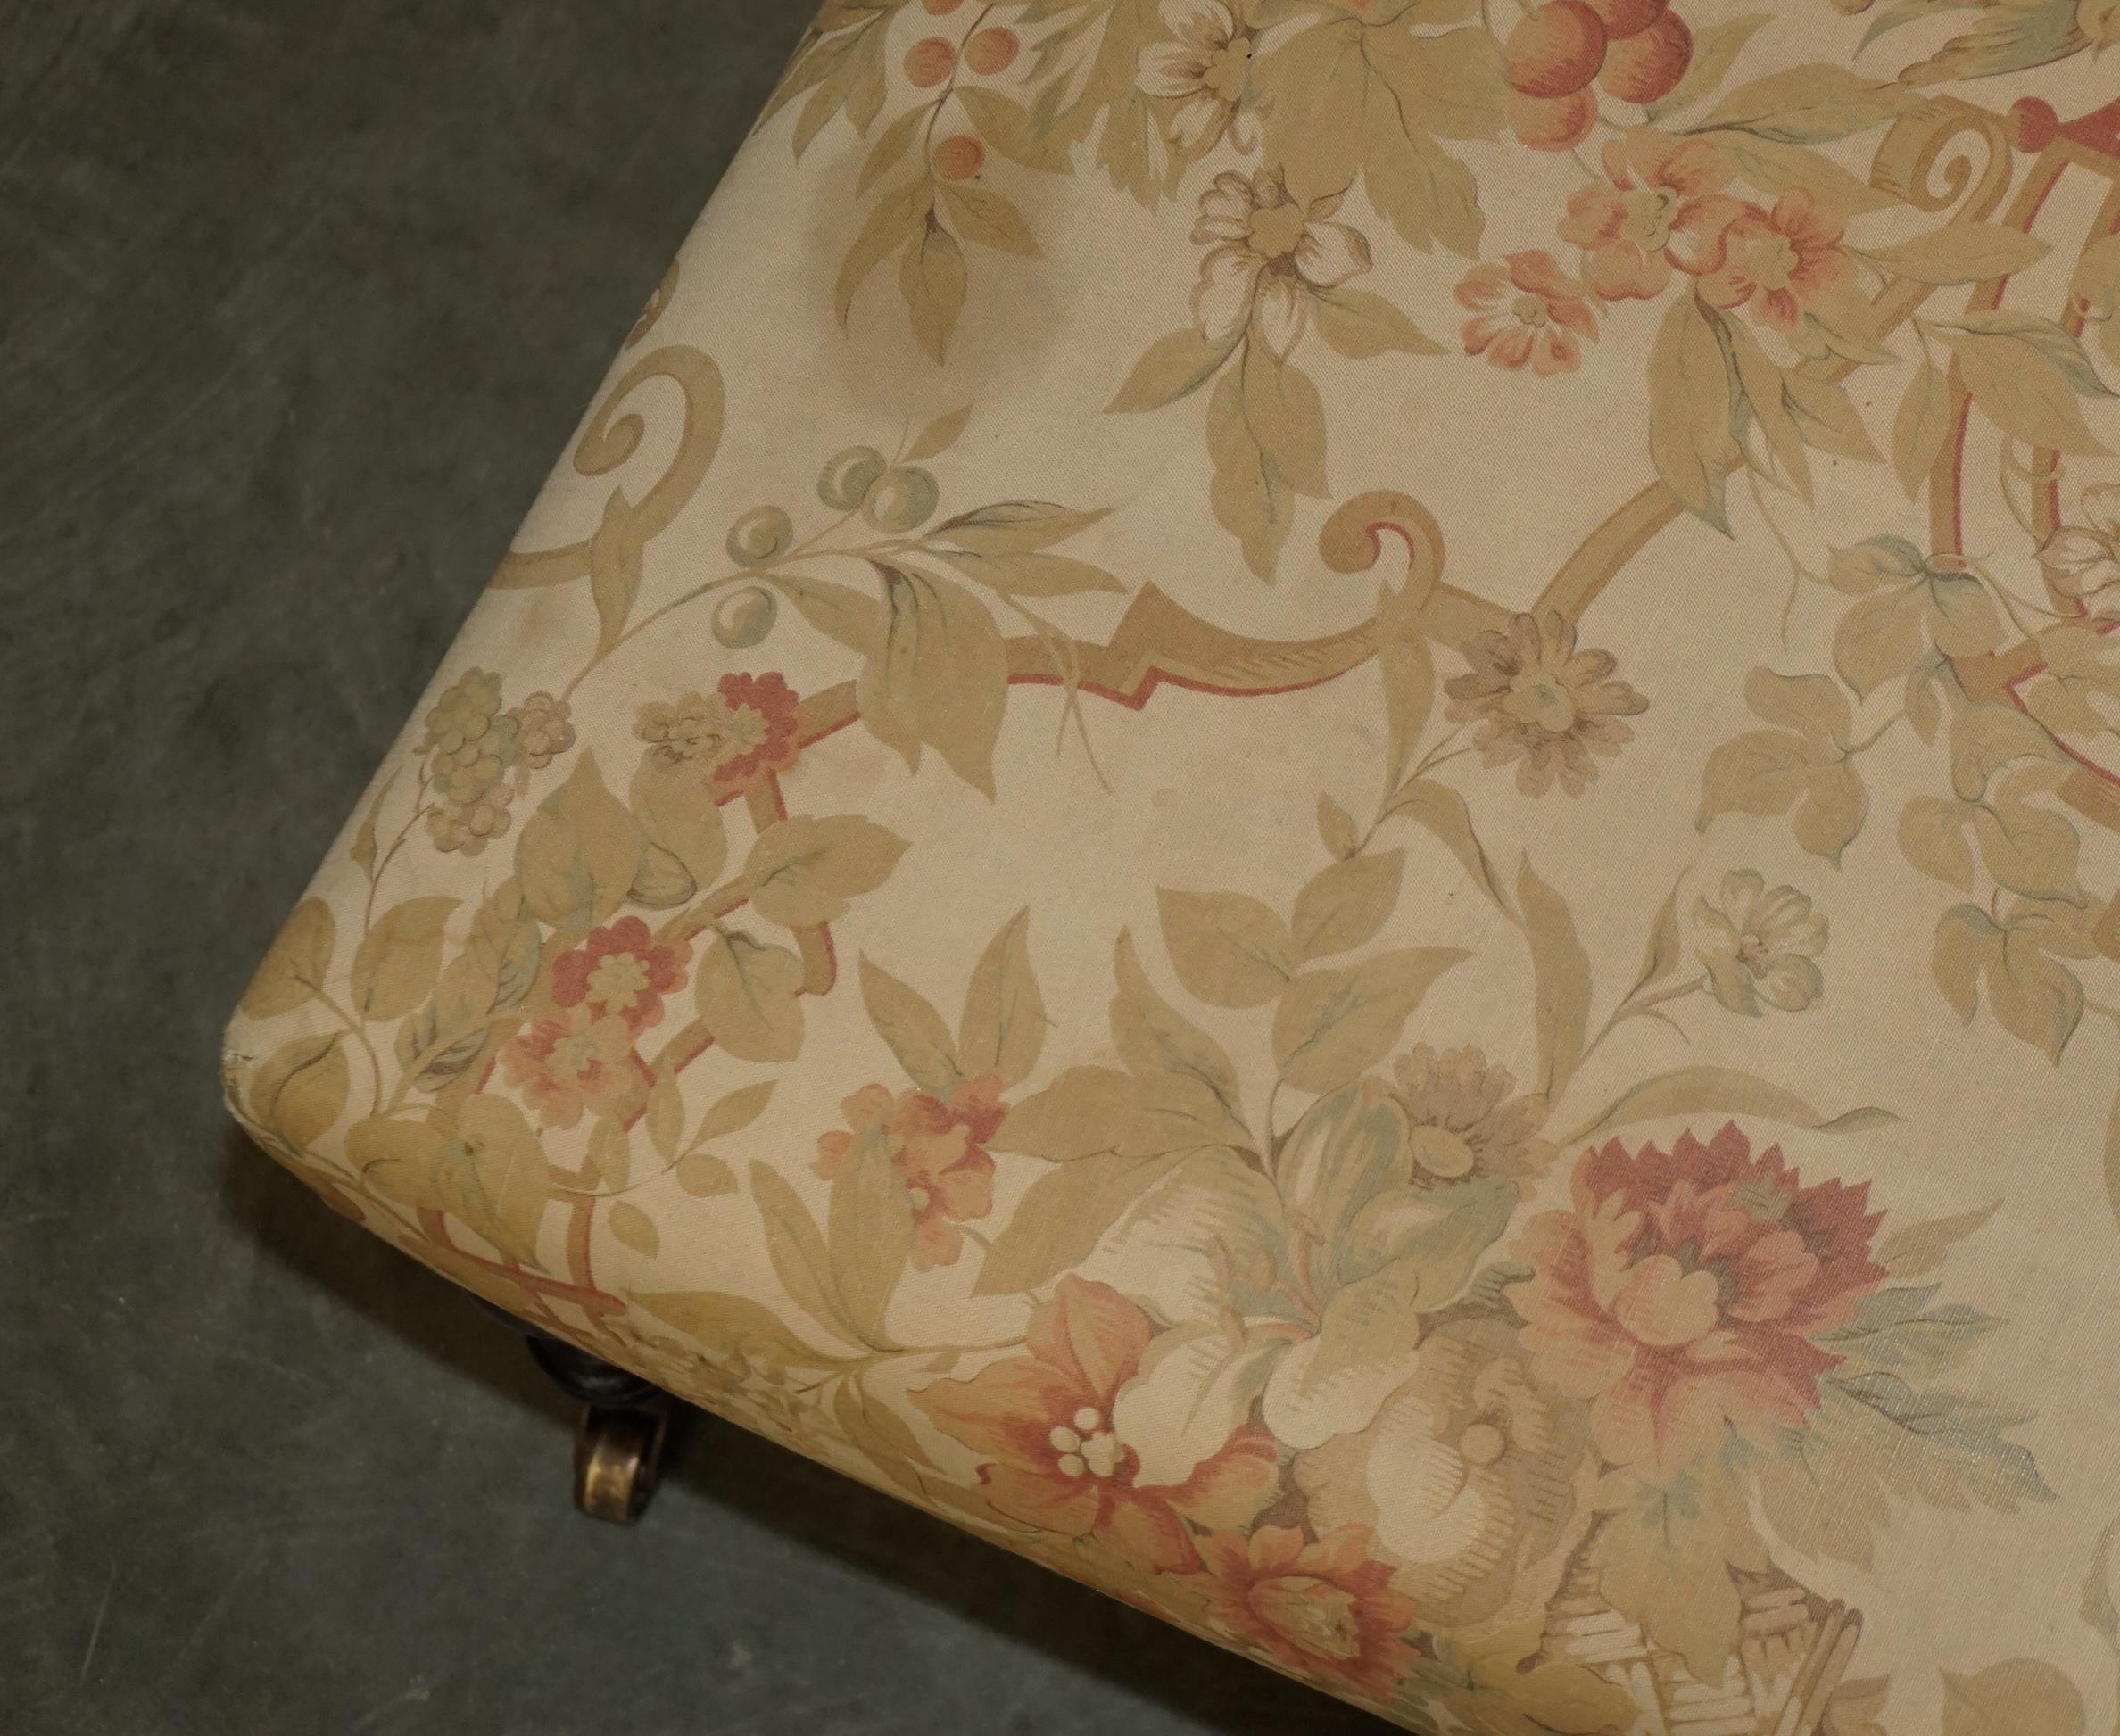 20th Century COLLECTABLE VERY LARGE ViNTAGE GEORGE SMITH CHELSEA FLORAL FOOTSTOOL OTTOMAN